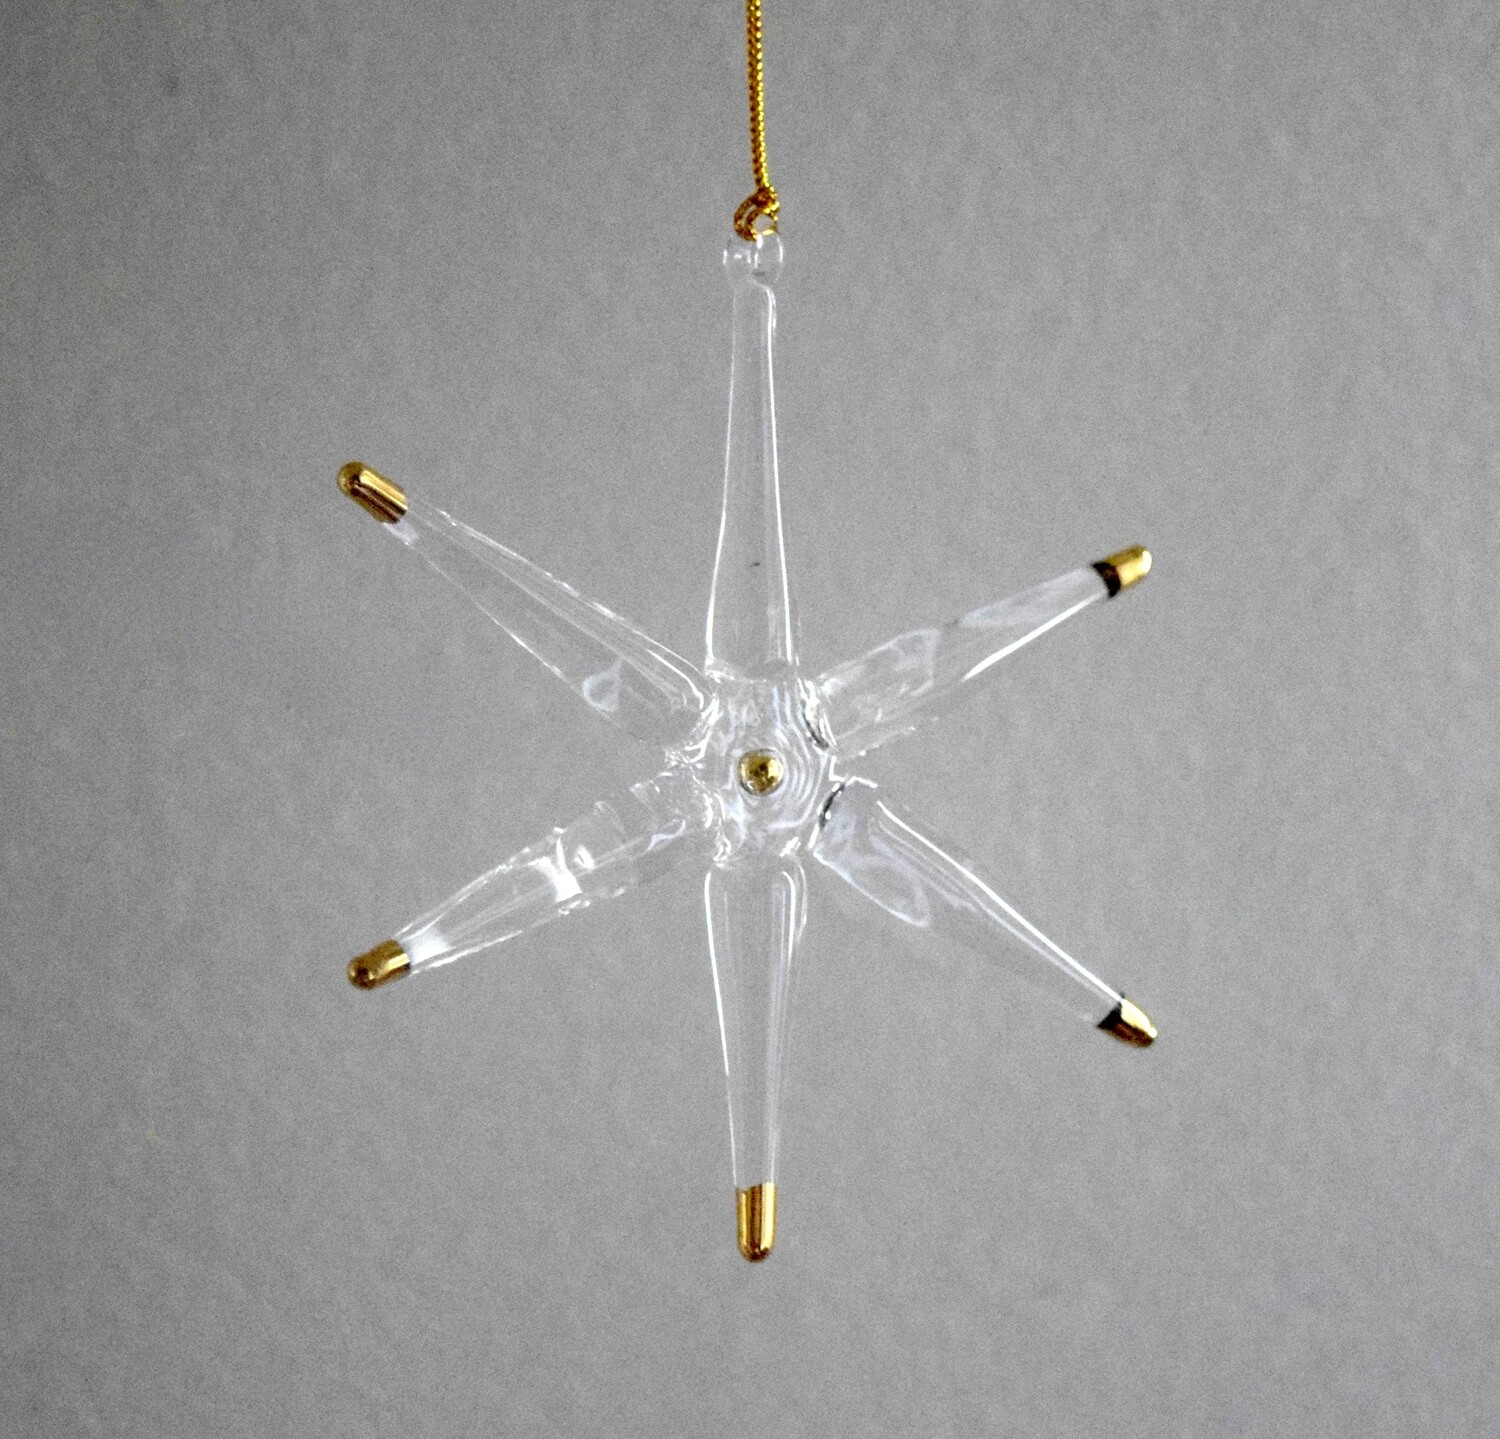 Star, Transparent with Gold Tips